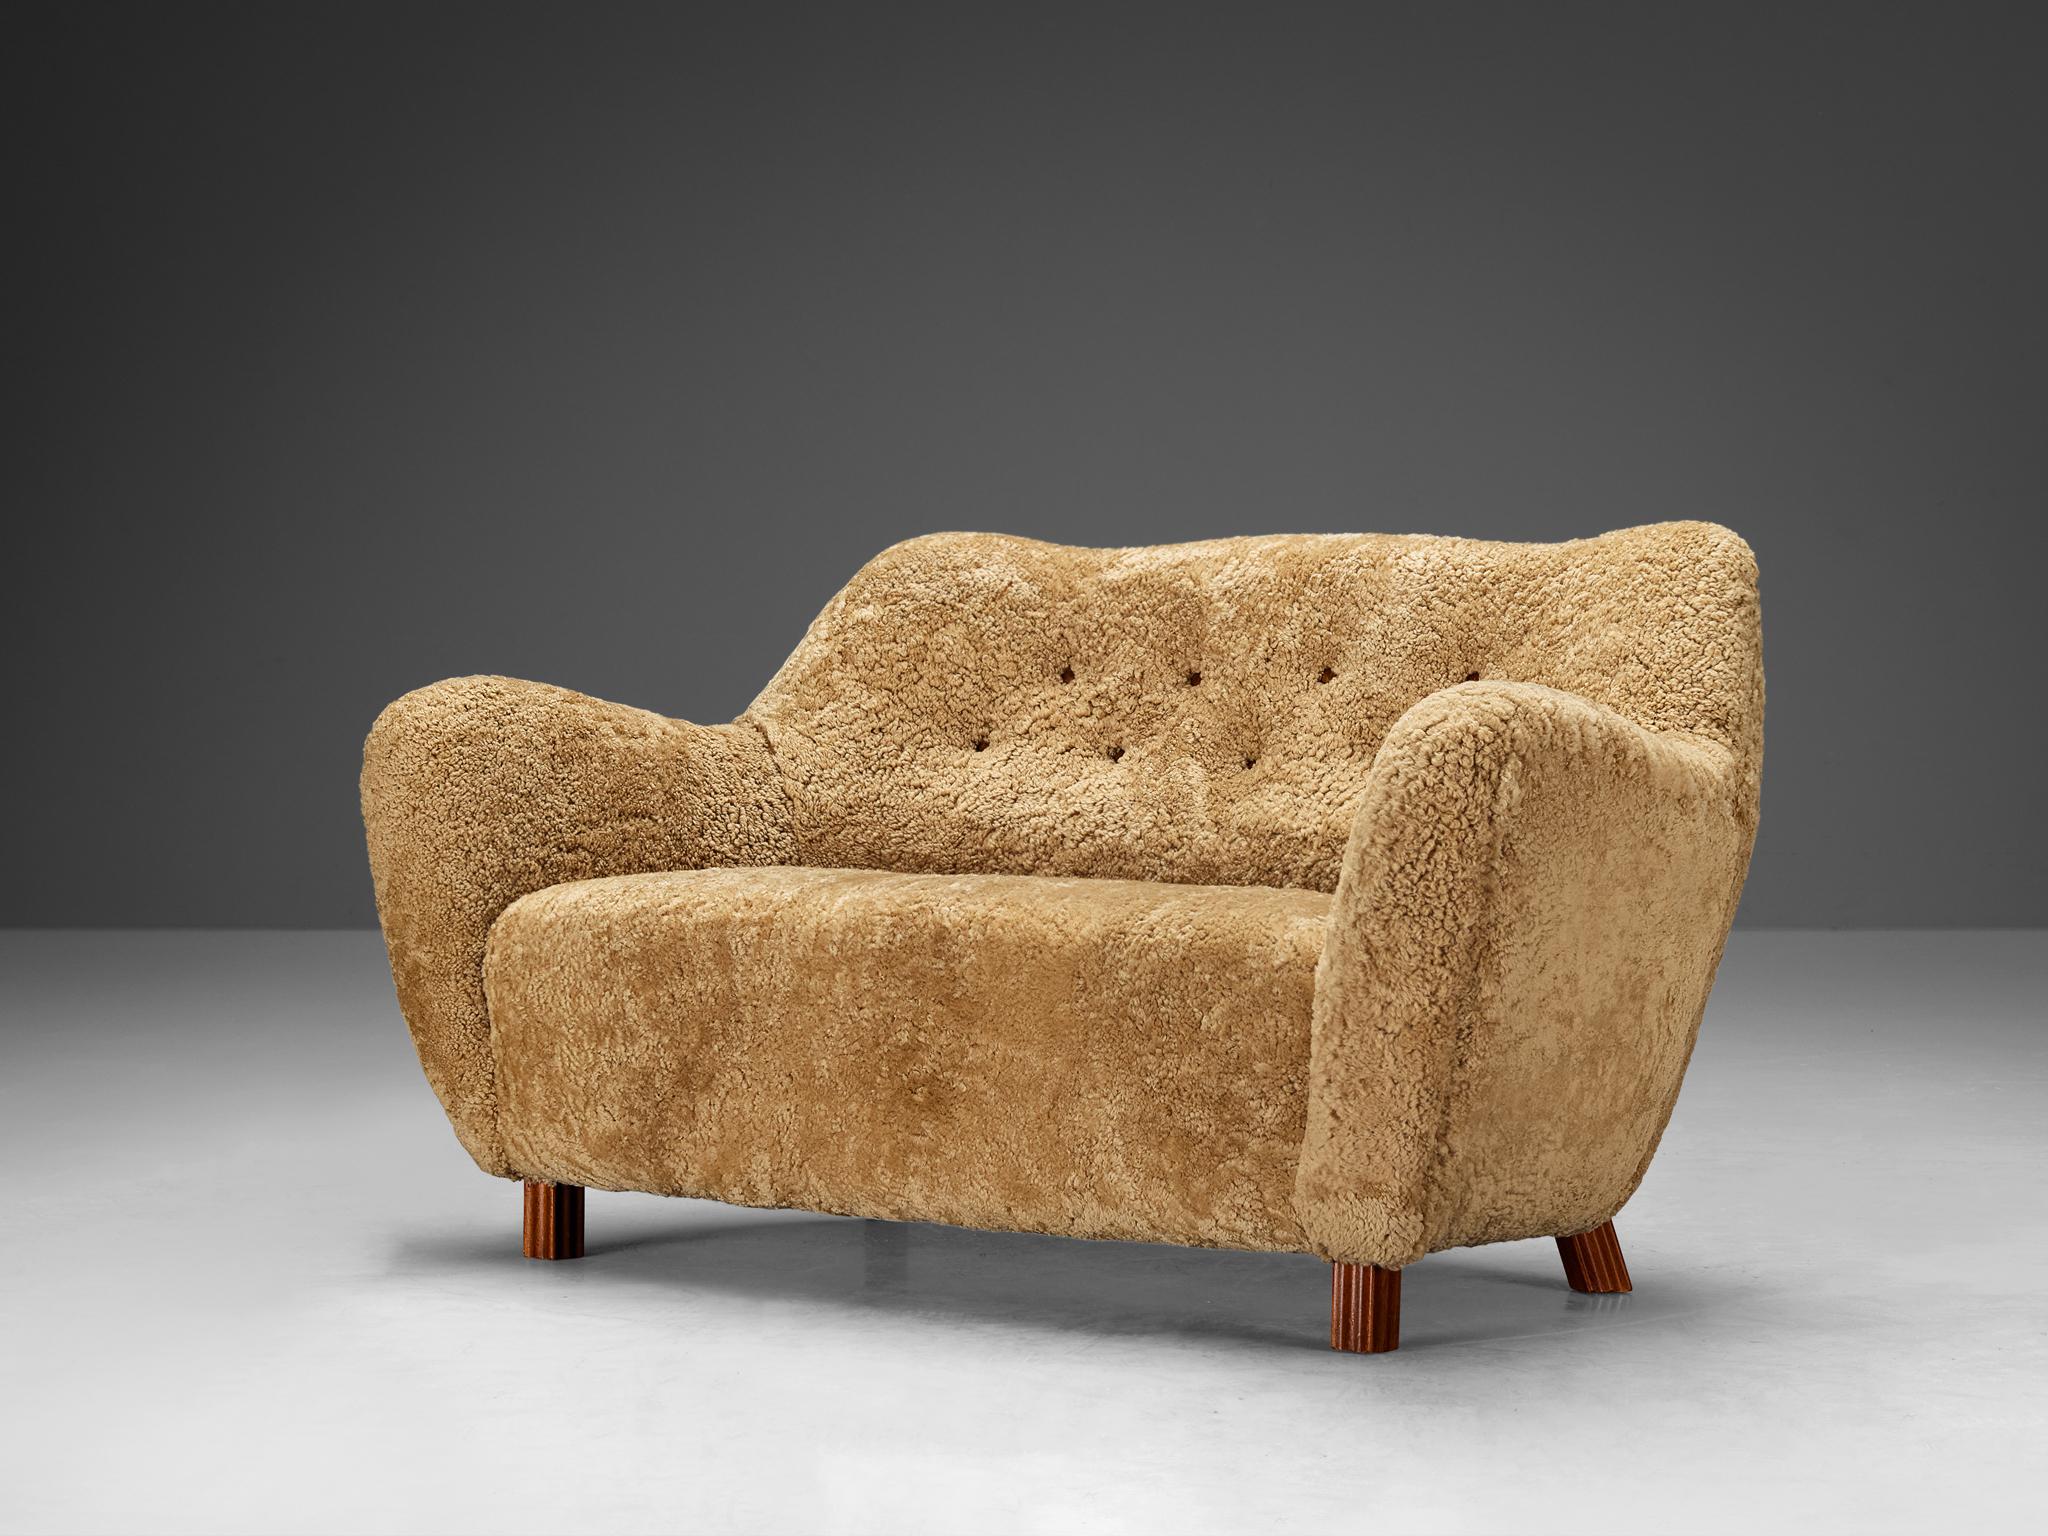 Sten Wicéns Möbelindustri, two seat sofa, sheepskin, leather, beech, Sweden, 1950s

Indulge in the epitome of comfort with this exquisite sofa, recently adorned in luxurious sheepskin upholstery. Crafted with meticulous attention to detail, this